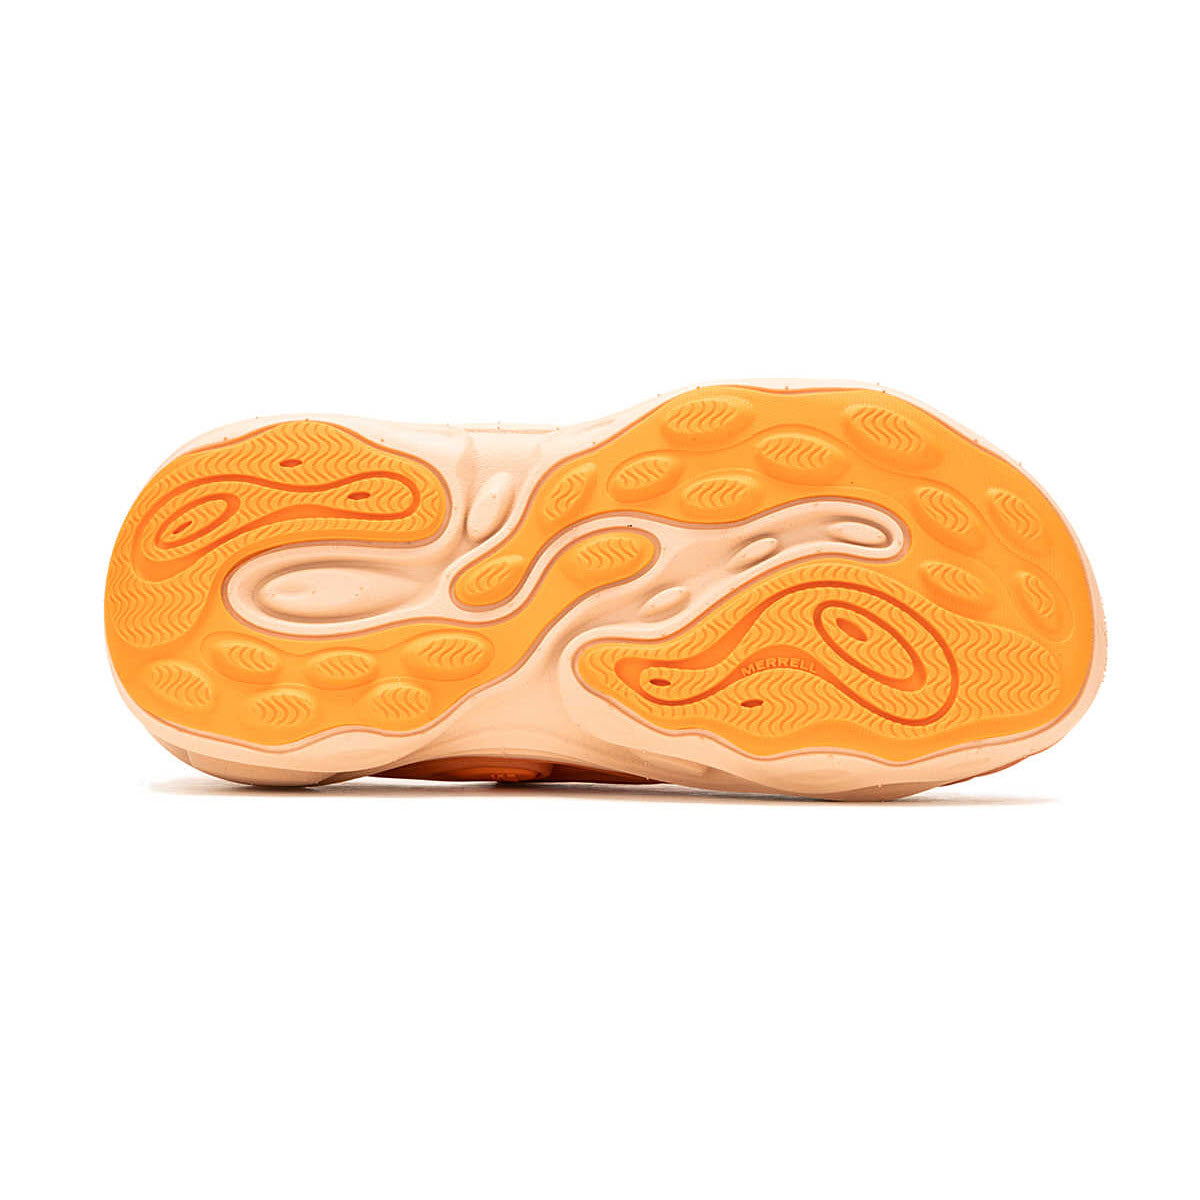 The image shows the orange sole of a Merrell hiking boot with a unique, wavy tread pattern, photographed against a white background.